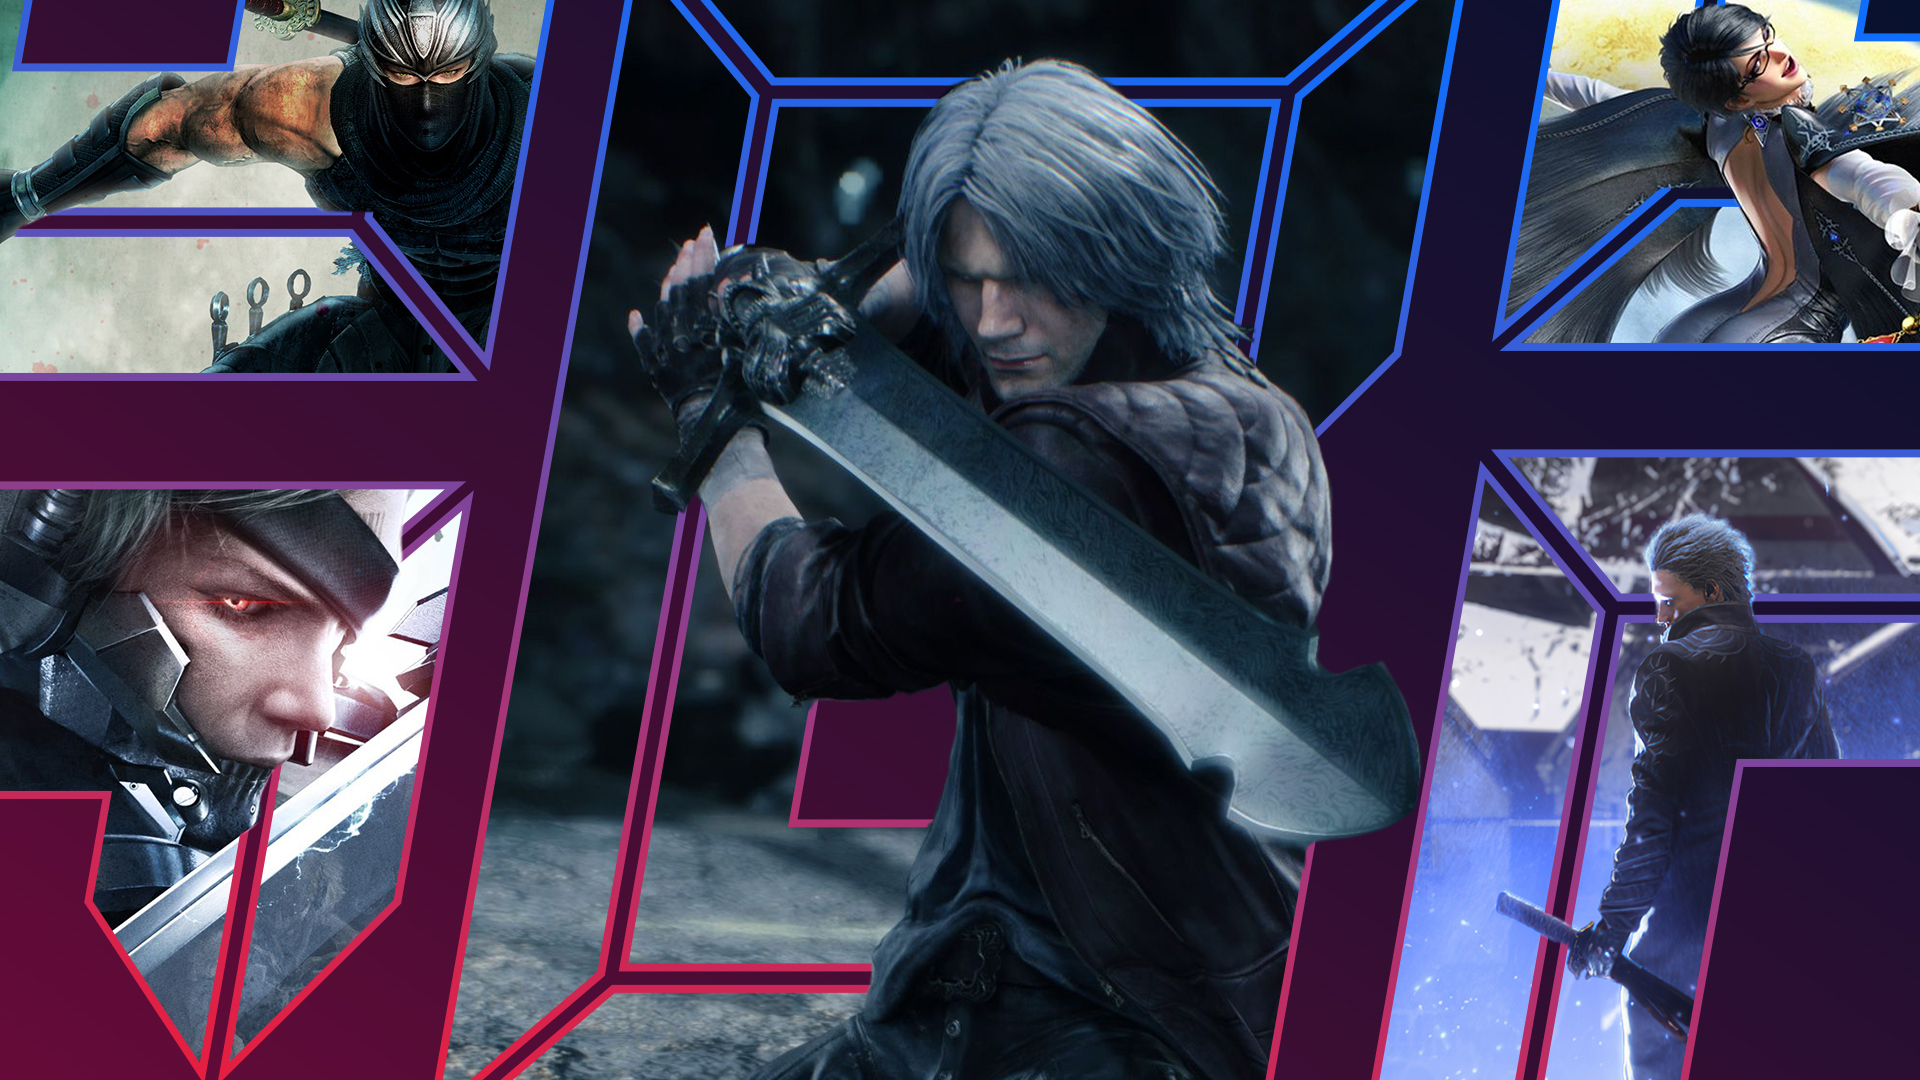 I made this in 2 hours - - - - - #dmc #dmc5 #devilmaycry